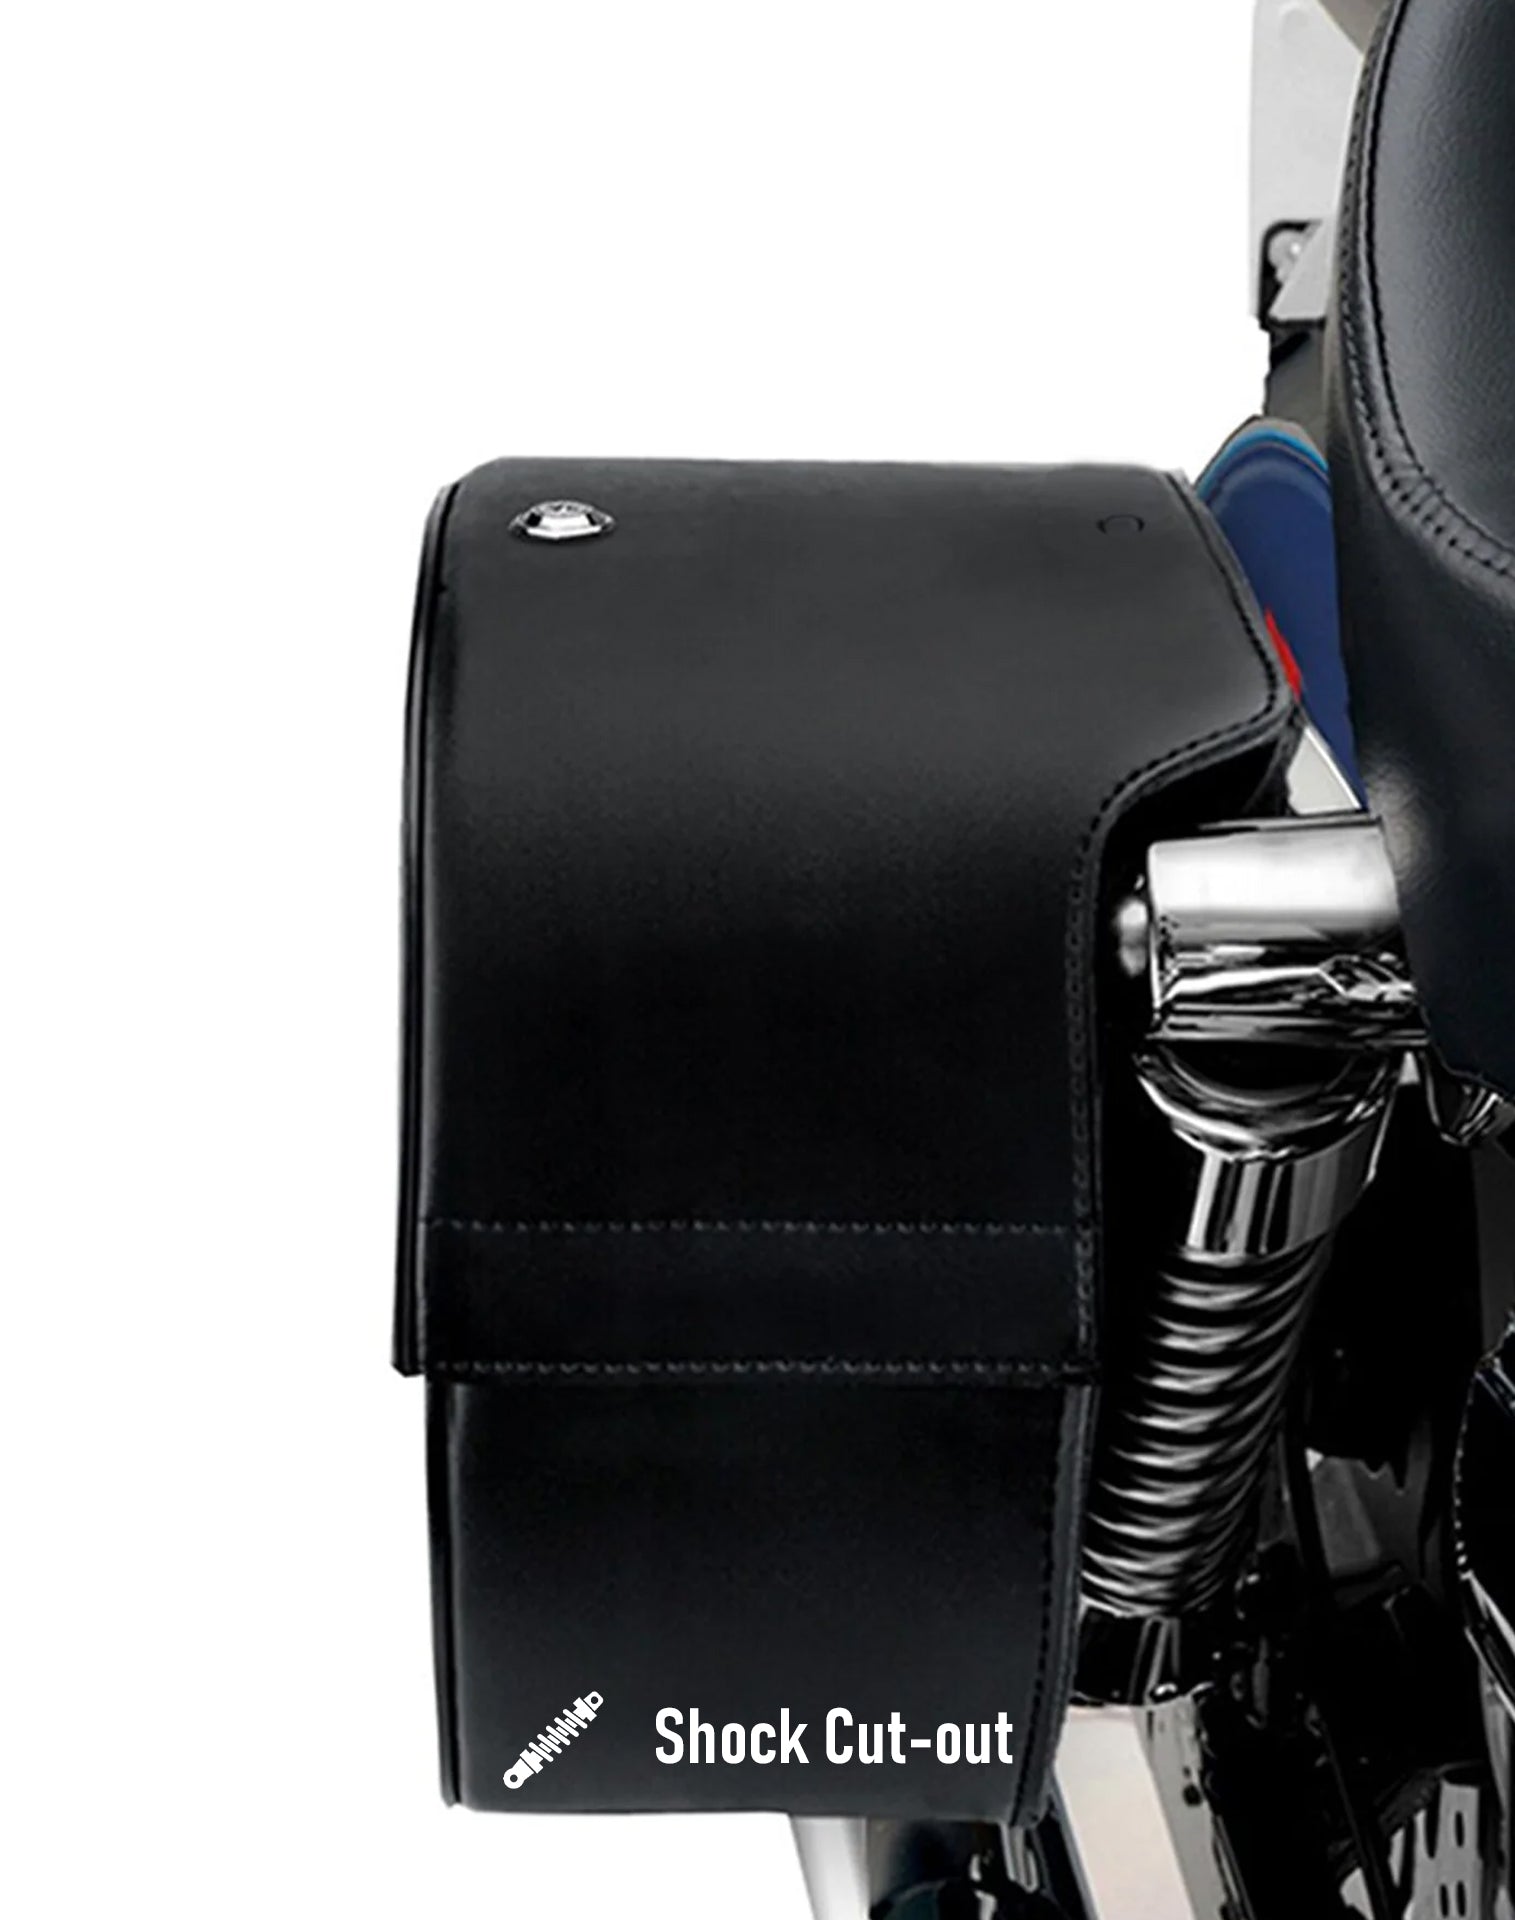 Viking Skarner Large Shock Cut Out Leather Motorcycle Saddlebags For Harley Sportster 48 Xl1200X Hard Shell Construction